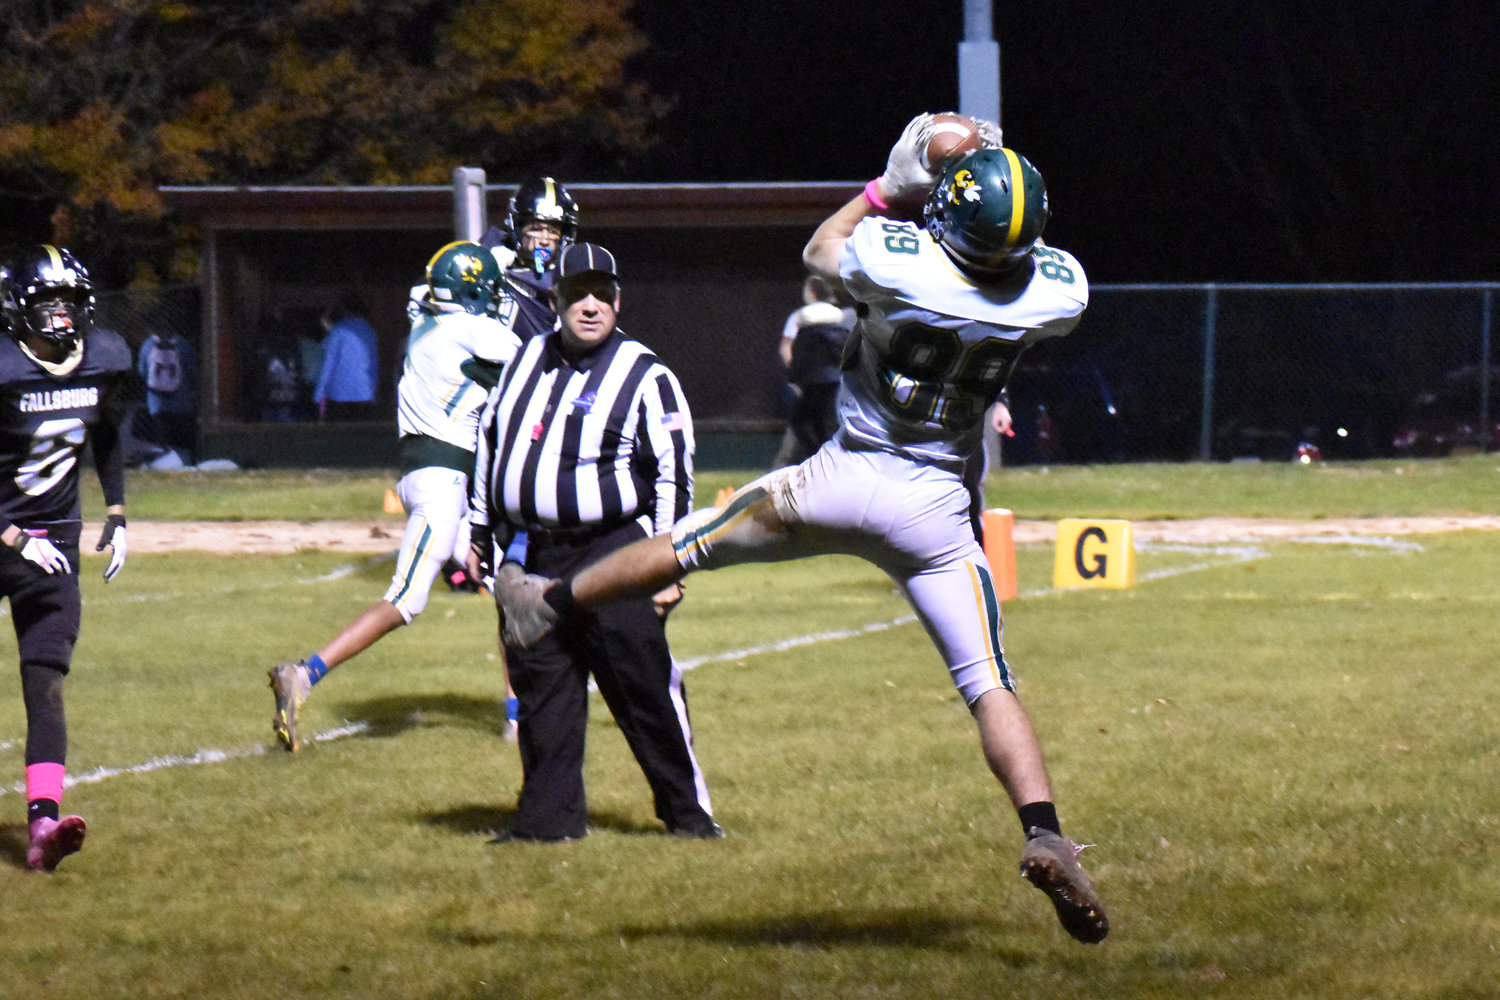 Josh Warming extends for a 2-point conversion reception in the first quarter.